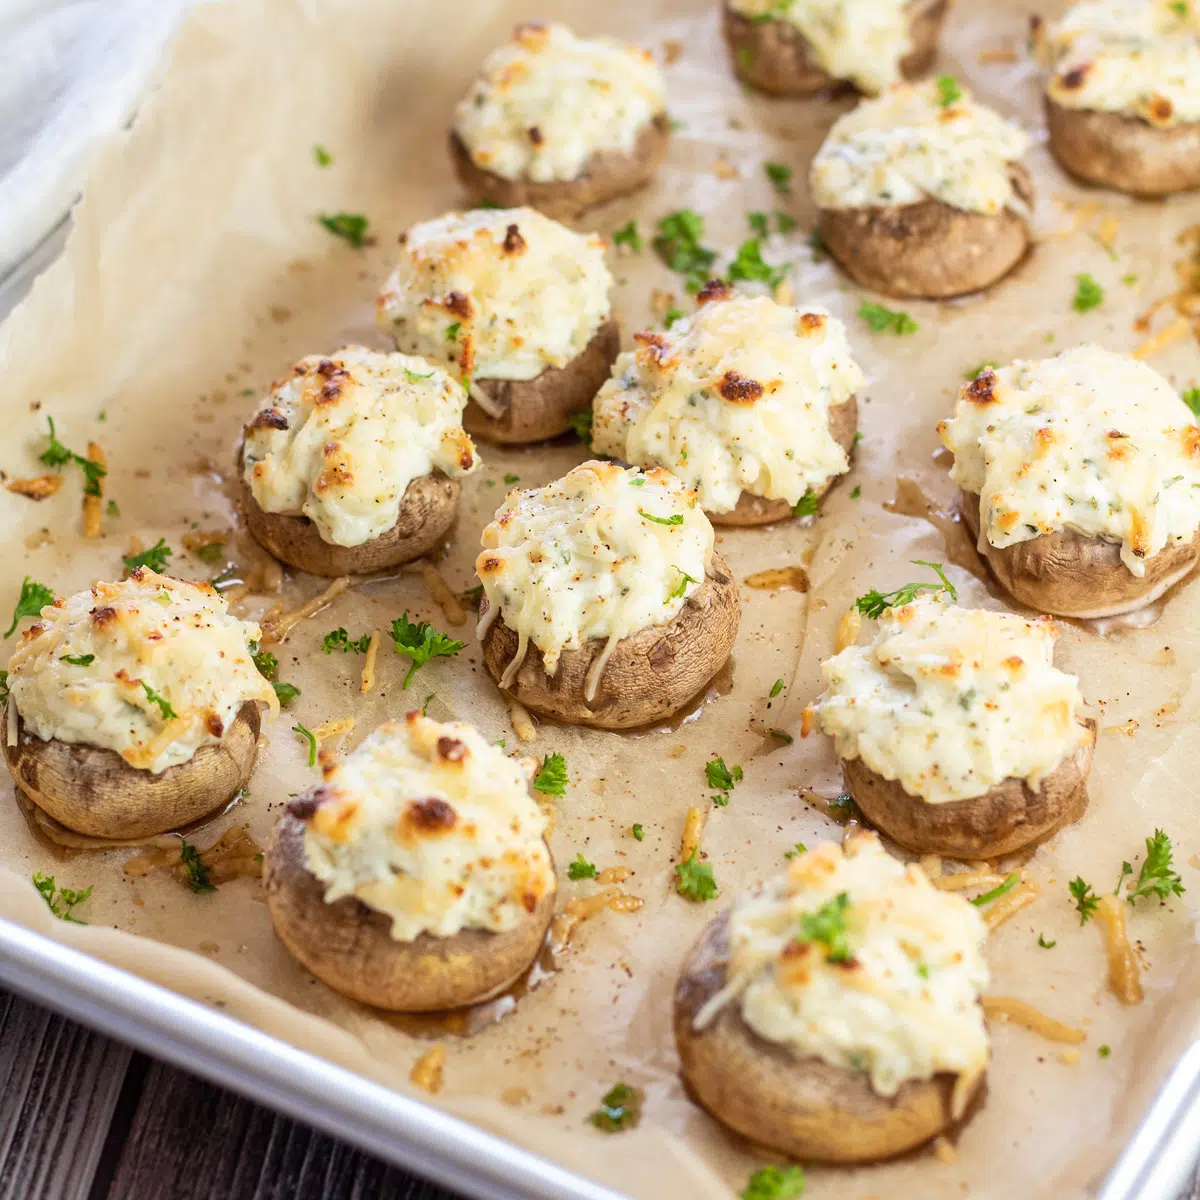 Best cream cheese stuffed mushrooms recipe shown after baking until toasted and tender.